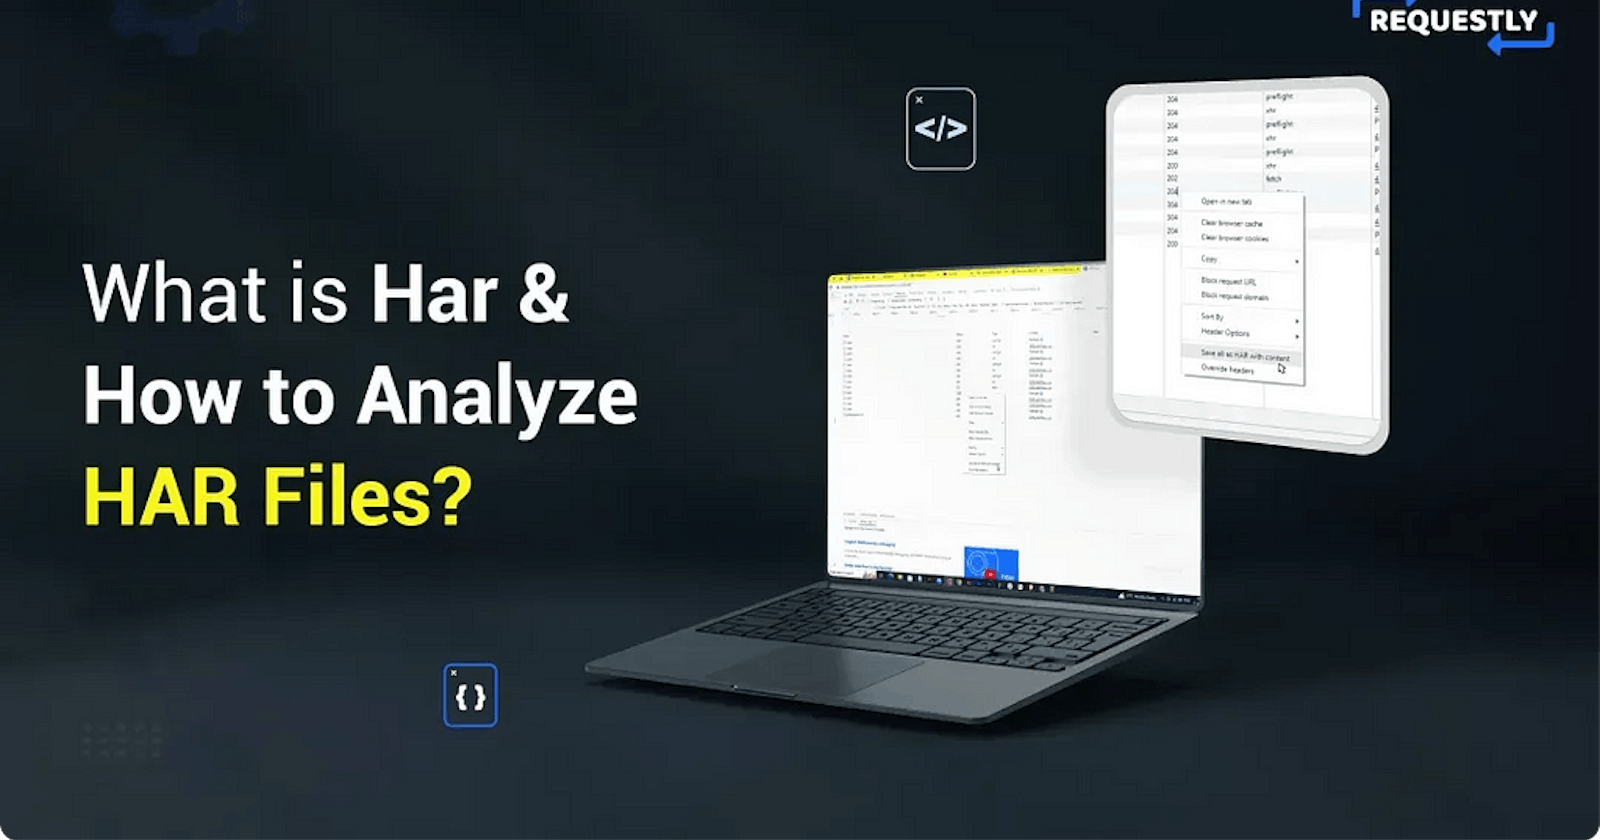 What is a HAR file and How to analyze them?